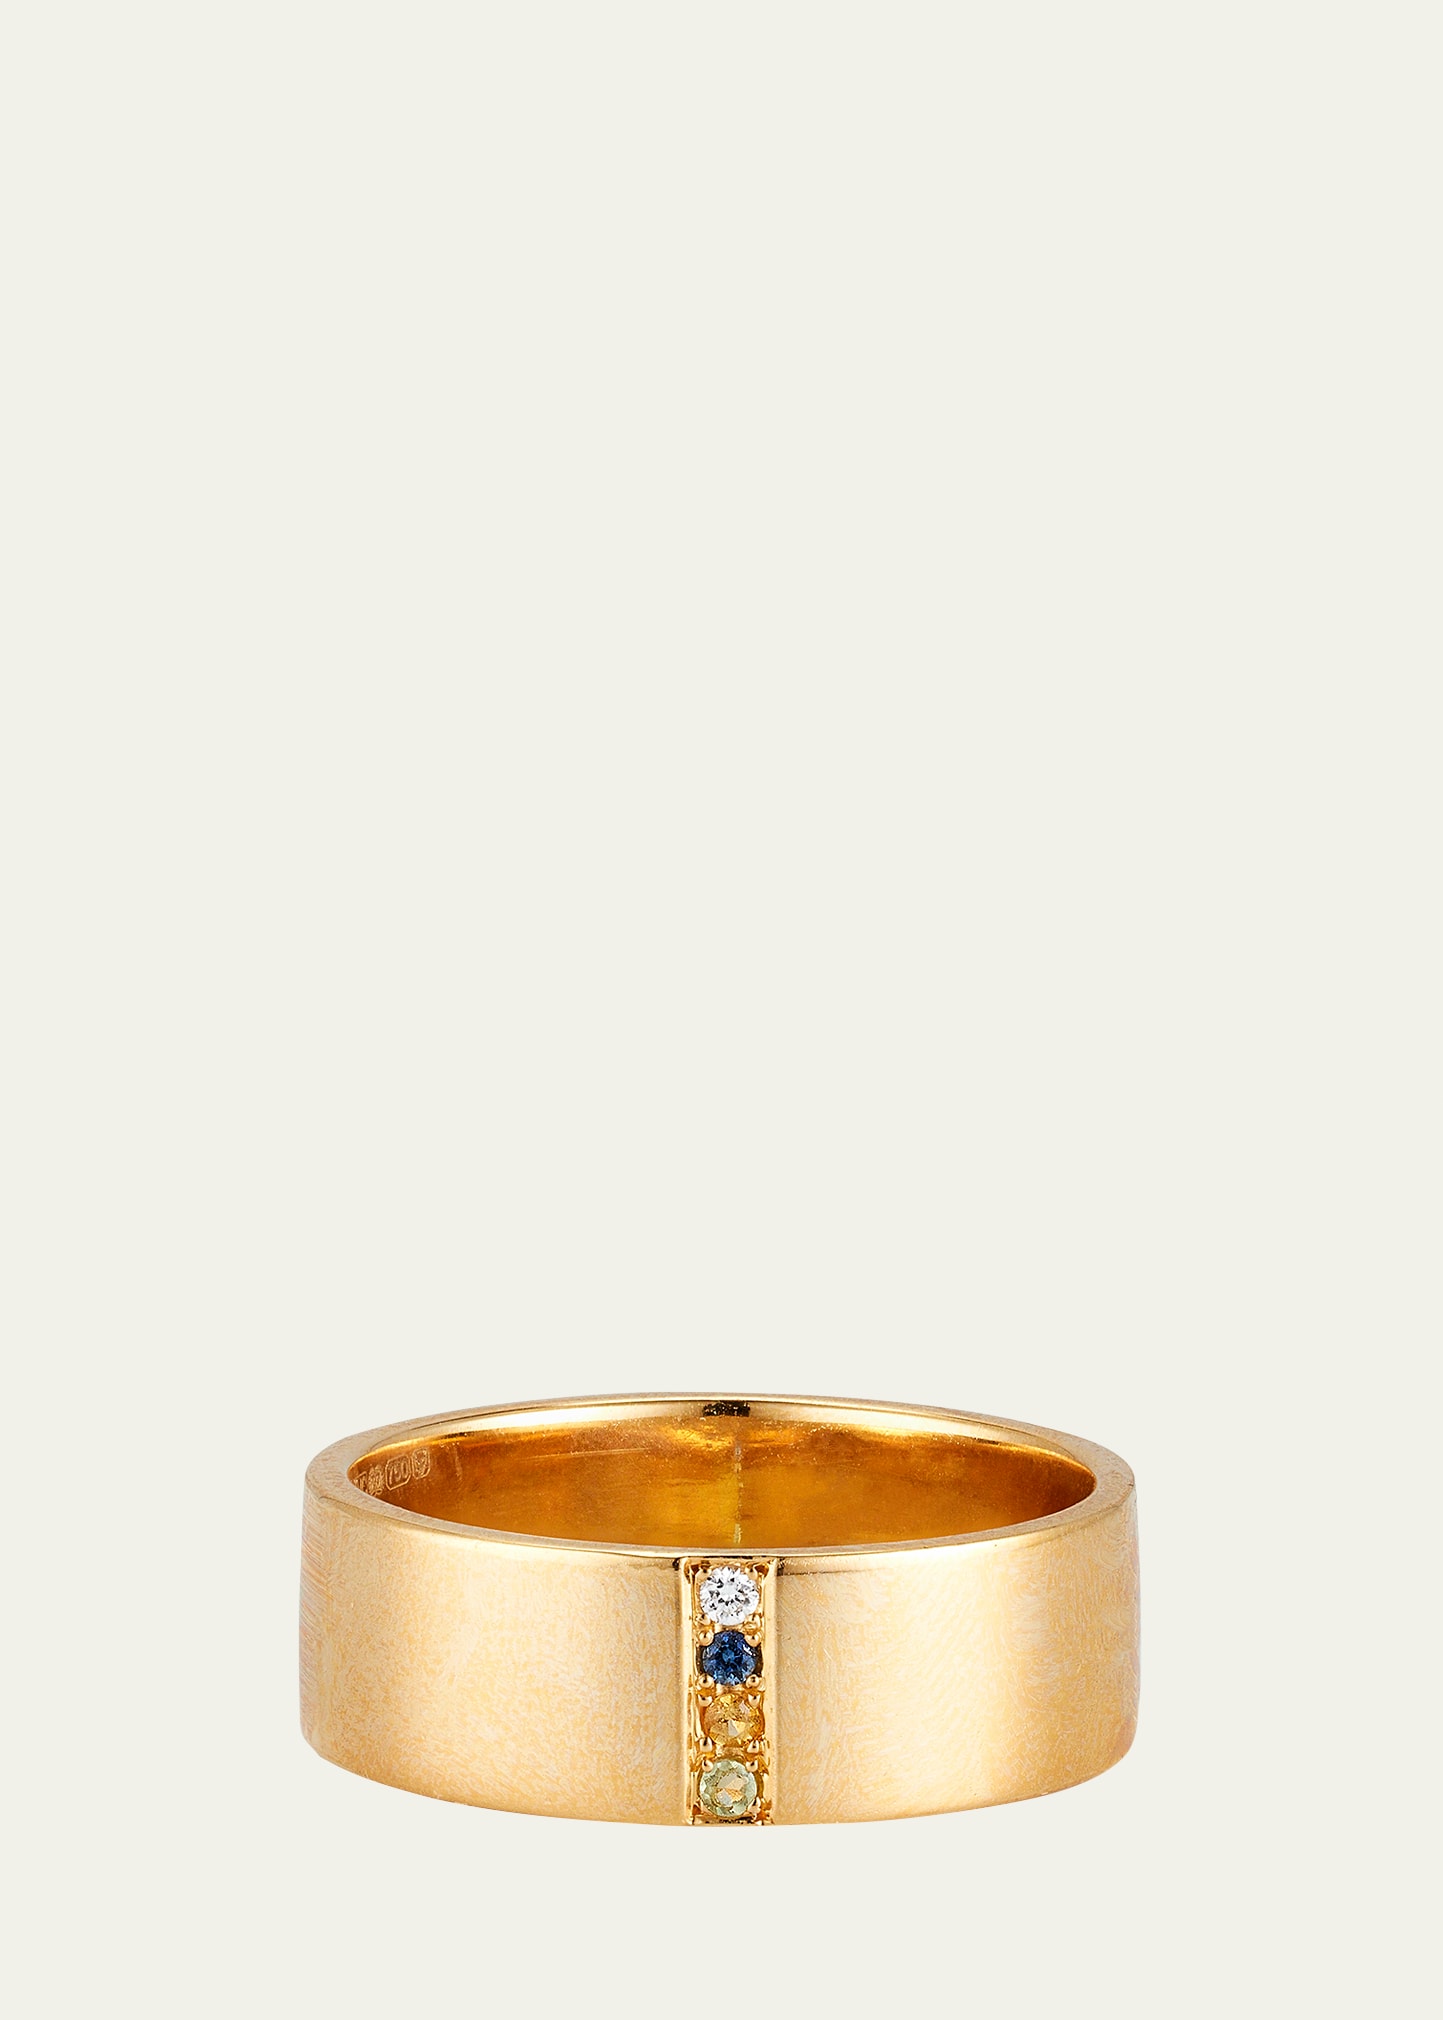 18K Yellow Gold Amelia Windsor Ring with Diamond and Gemstones